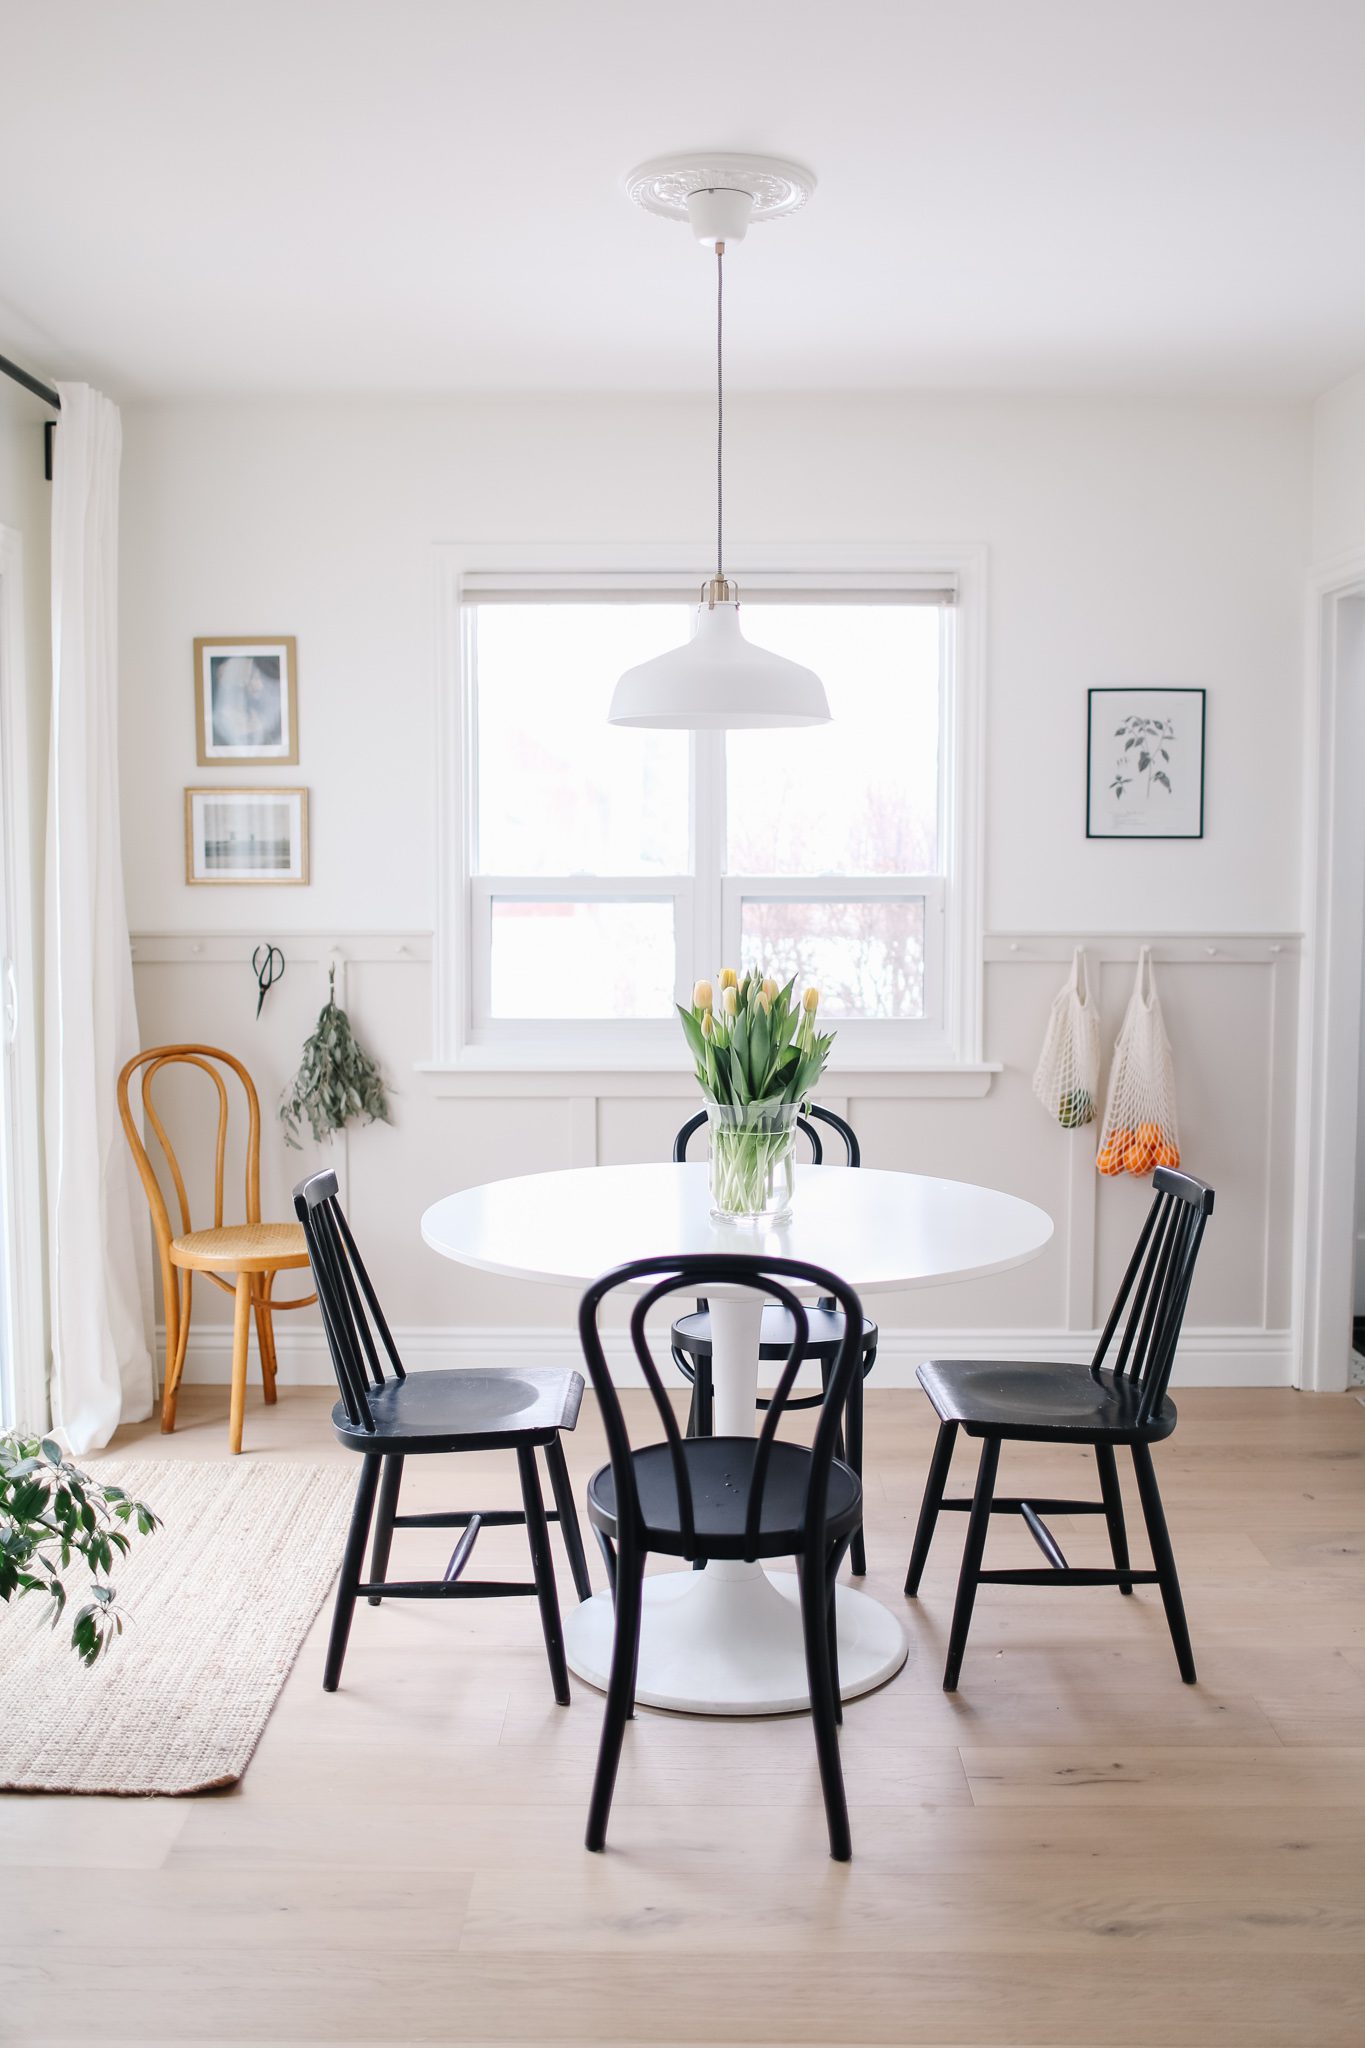 A white dining room table with black chairs